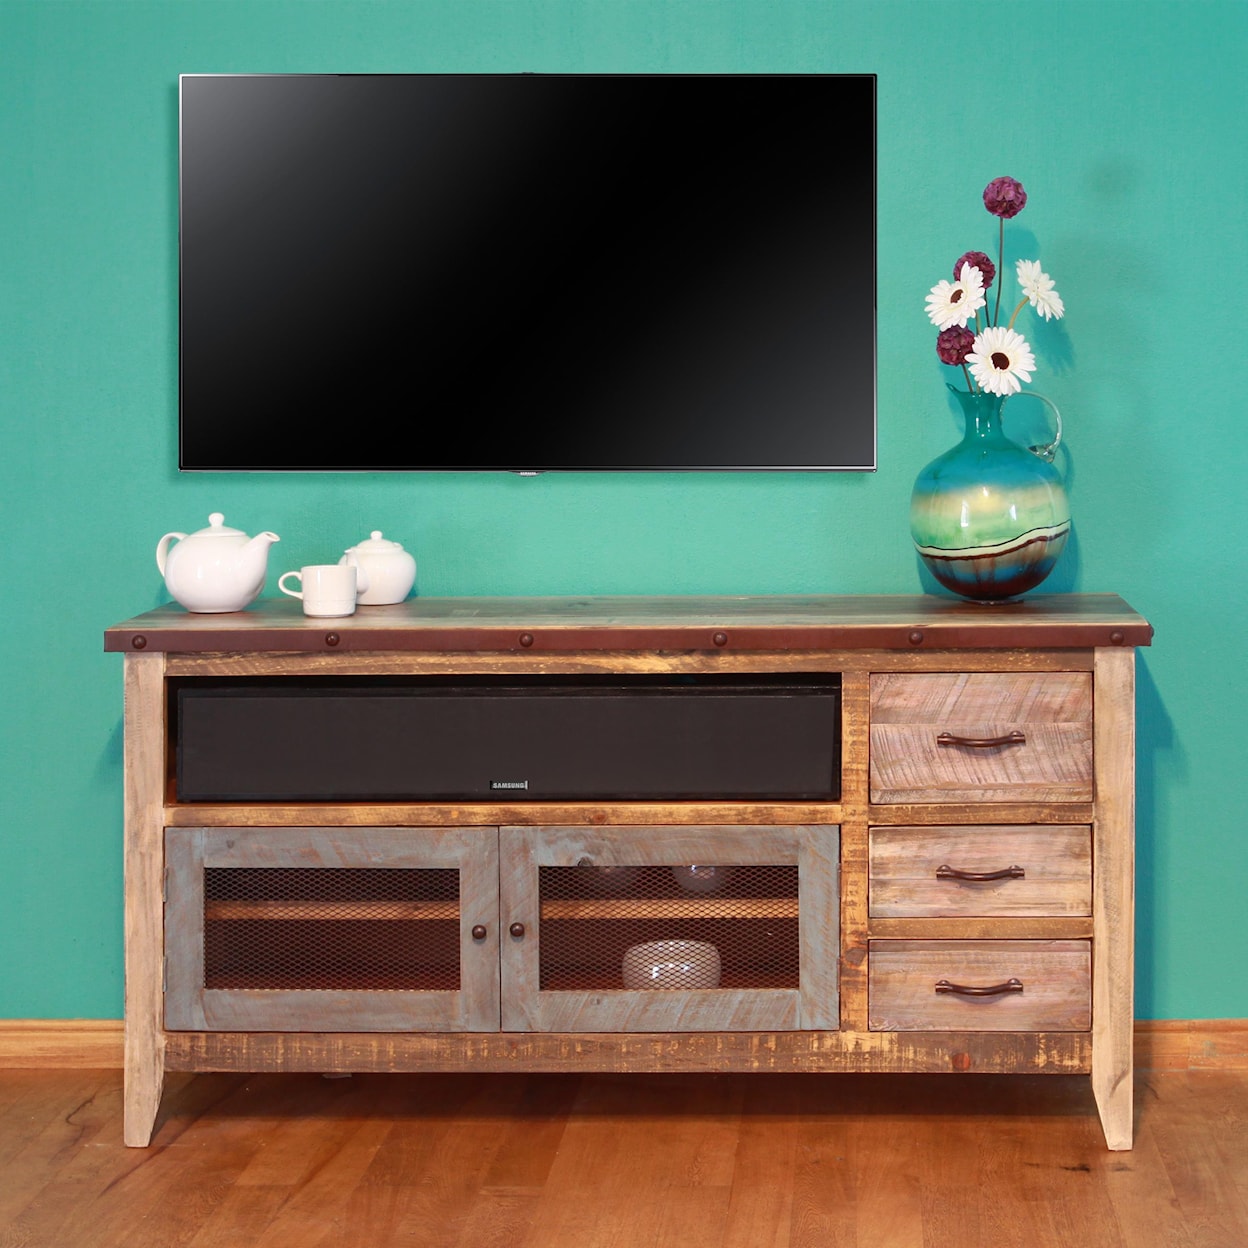 IFD 900 Antique Solid Pine 62" TV Stand